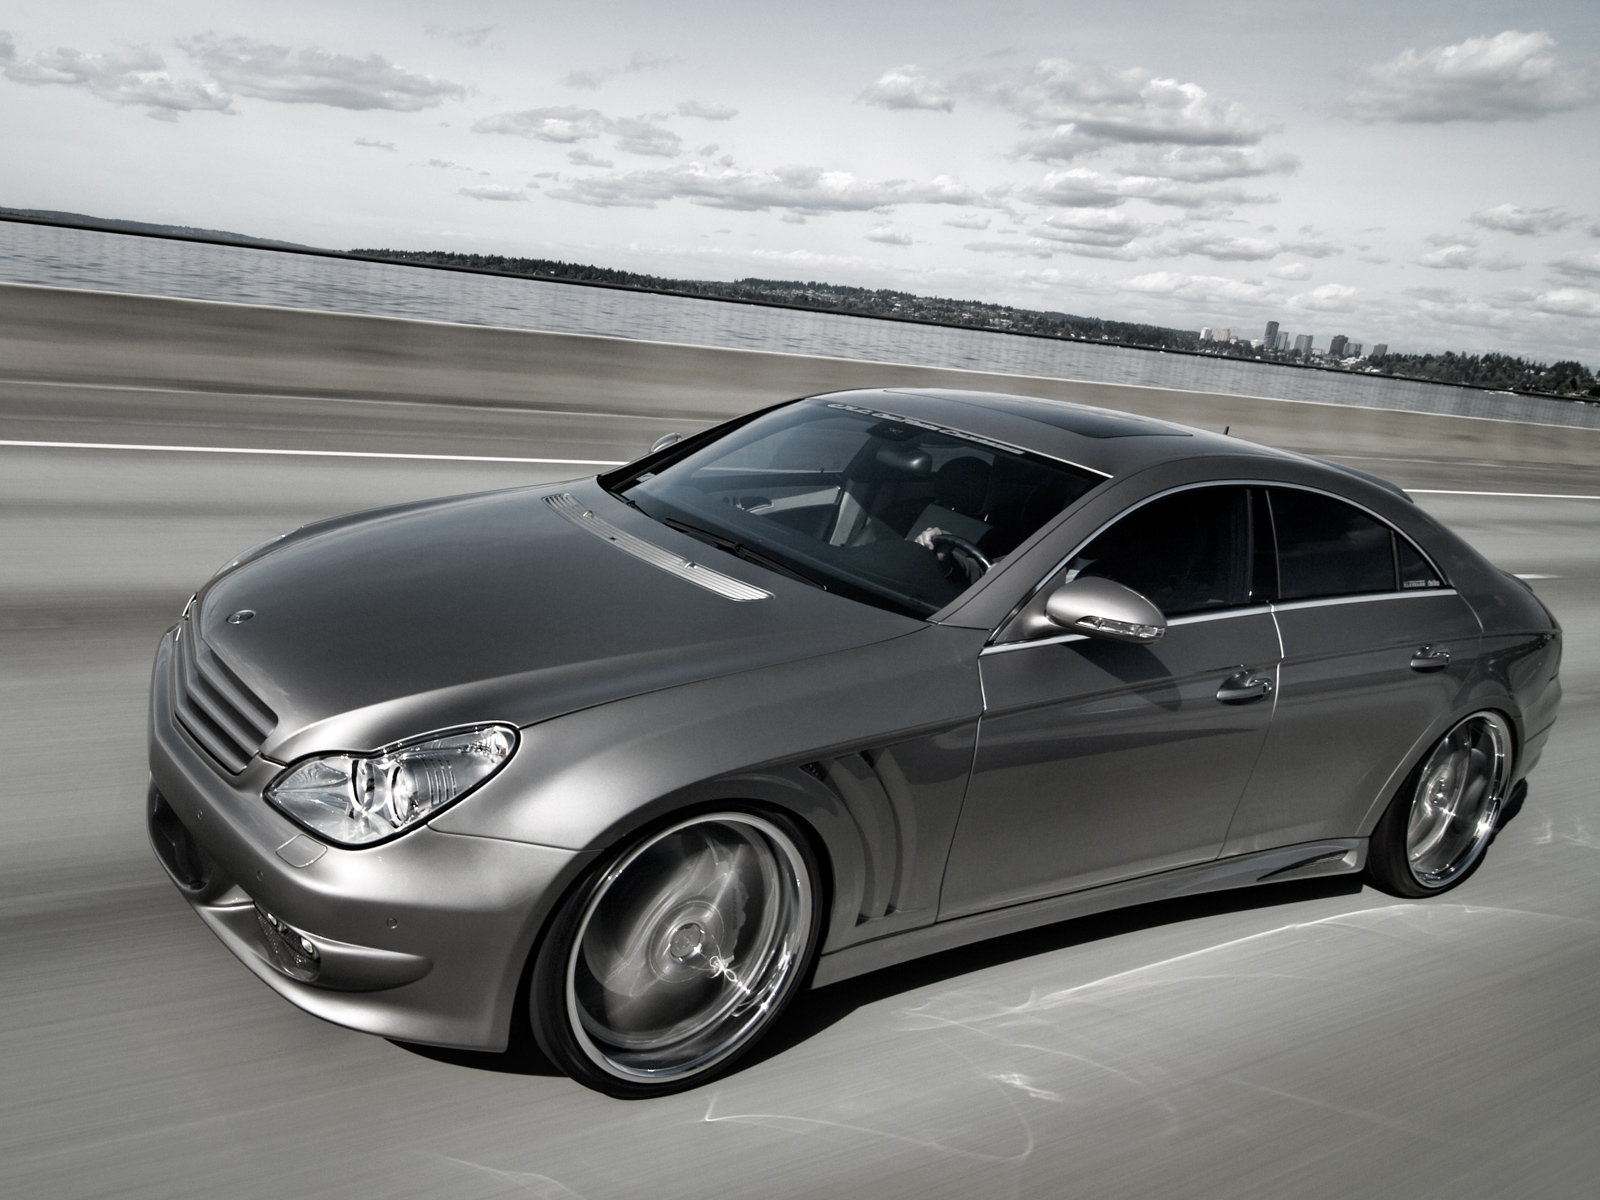 HQ Mercedes-benz Cls 55 Amg Wallpapers | File 638.14Kb